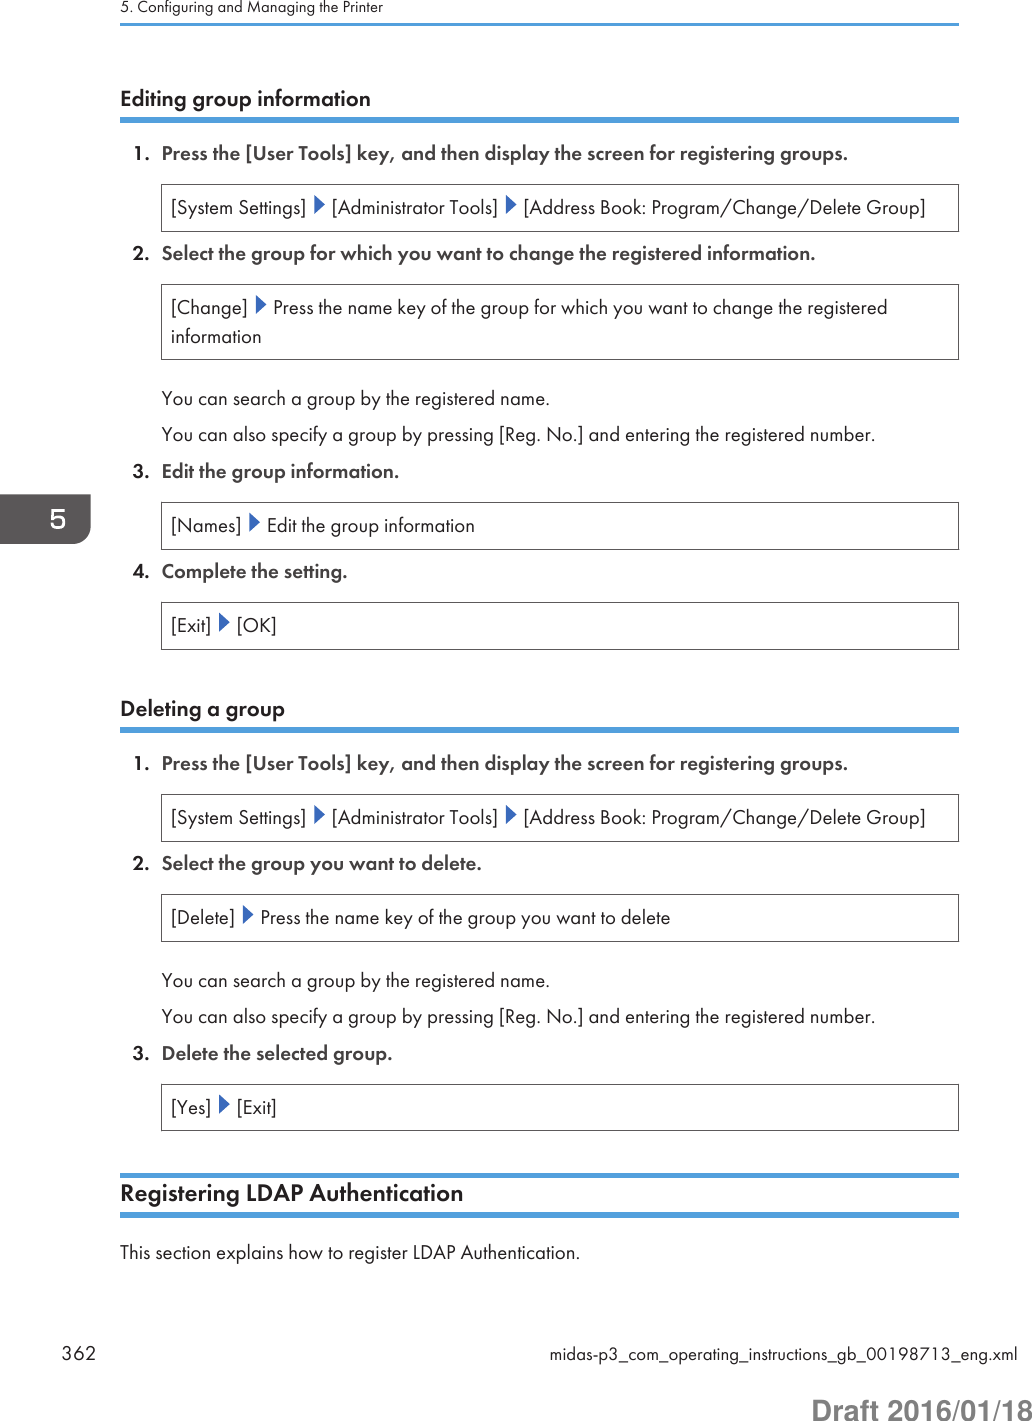 Editing group information1. Press the [User Tools] key, and then display the screen for registering groups.[System Settings]   [Administrator Tools]   [Address Book: Program/Change/Delete Group]2. Select the group for which you want to change the registered information.[Change]   Press the name key of the group for which you want to change the registeredinformationYou can search a group by the registered name.You can also specify a group by pressing [Reg. No.] and entering the registered number.3. Edit the group information.[Names]   Edit the group information4. Complete the setting.[Exit]   [OK]Deleting a group1. Press the [User Tools] key, and then display the screen for registering groups.[System Settings]   [Administrator Tools]   [Address Book: Program/Change/Delete Group]2. Select the group you want to delete.[Delete]   Press the name key of the group you want to deleteYou can search a group by the registered name.You can also specify a group by pressing [Reg. No.] and entering the registered number.3. Delete the selected group.[Yes]   [Exit]Registering LDAP AuthenticationThis section explains how to register LDAP Authentication.5. Configuring and Managing the Printer362 midas-p3_com_operating_instructions_gb_00198713_eng.xmlDraft 2016/01/18